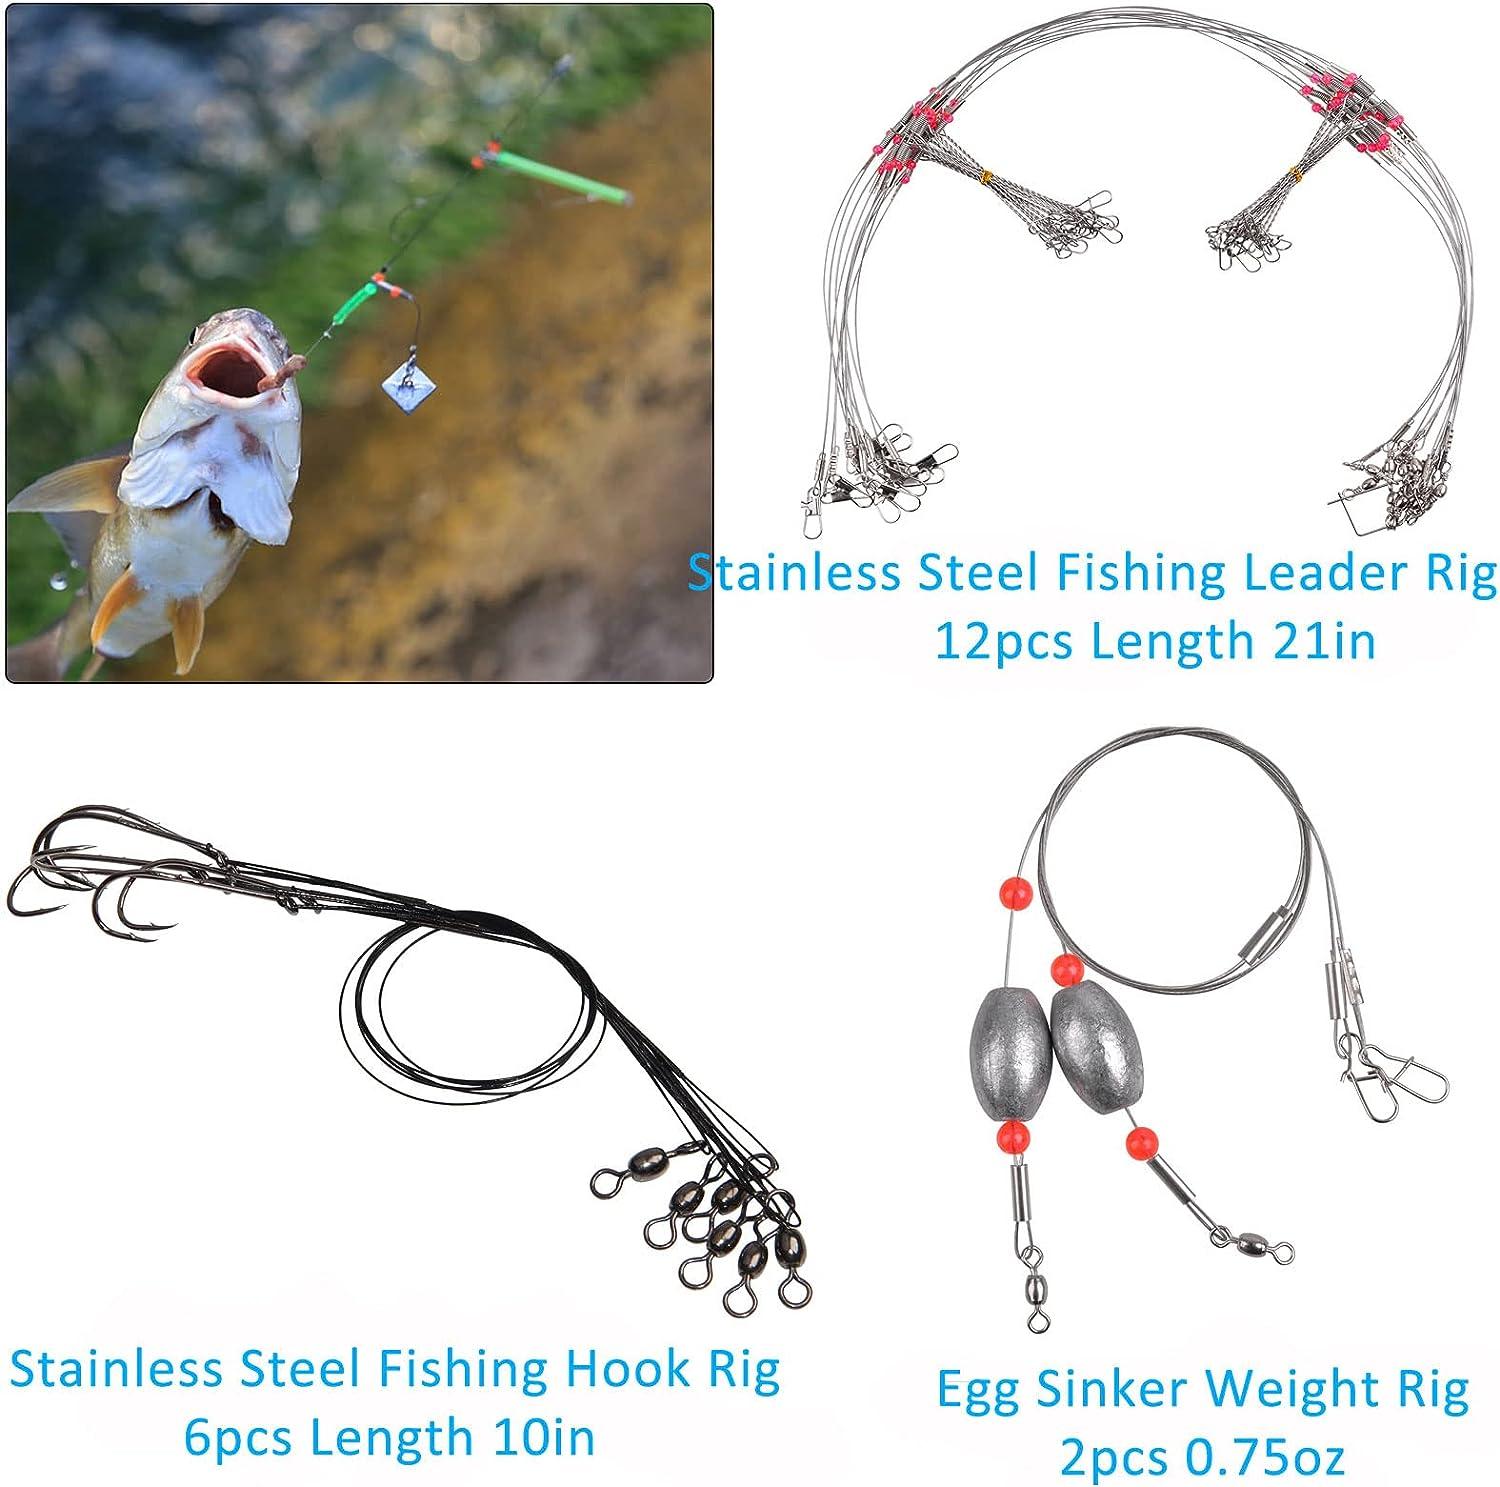 Saltwater Surf Fishing Rig – 46pcs Pyramid Sinker Octopus Circle Hook  Forged Hook Wire Trace Leader Rig with Swivel Snaps Beads